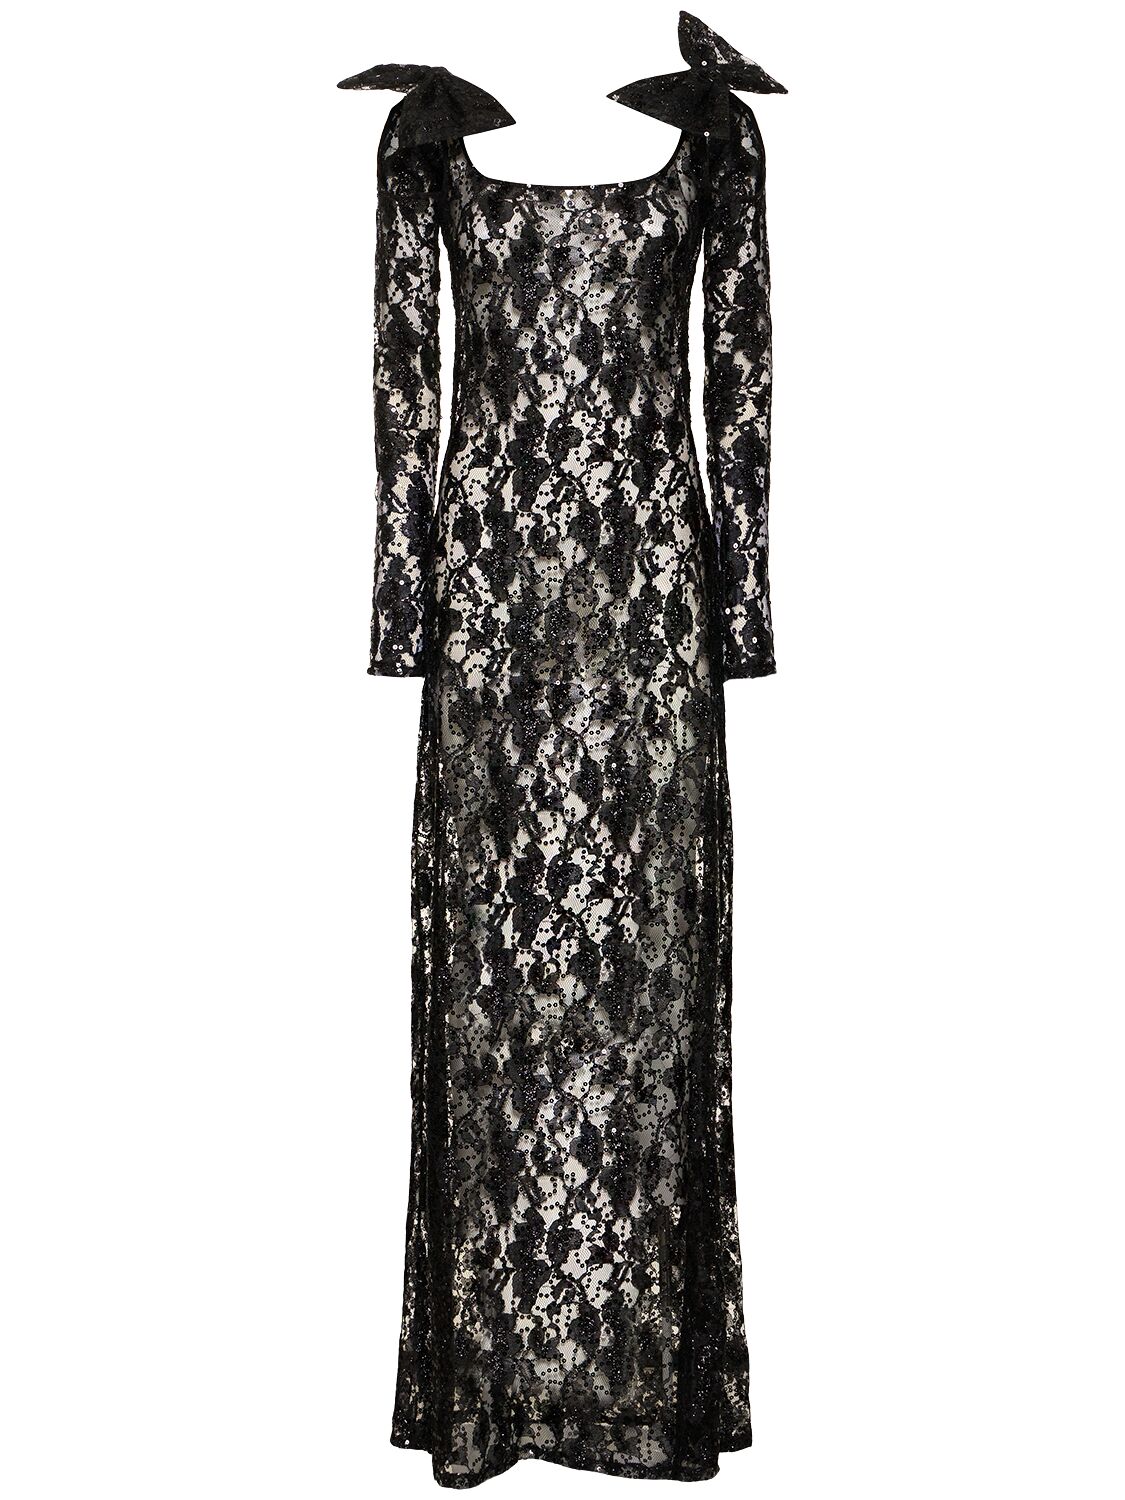 Image of Sequined Lace Cutout Long Dress W/ Bow